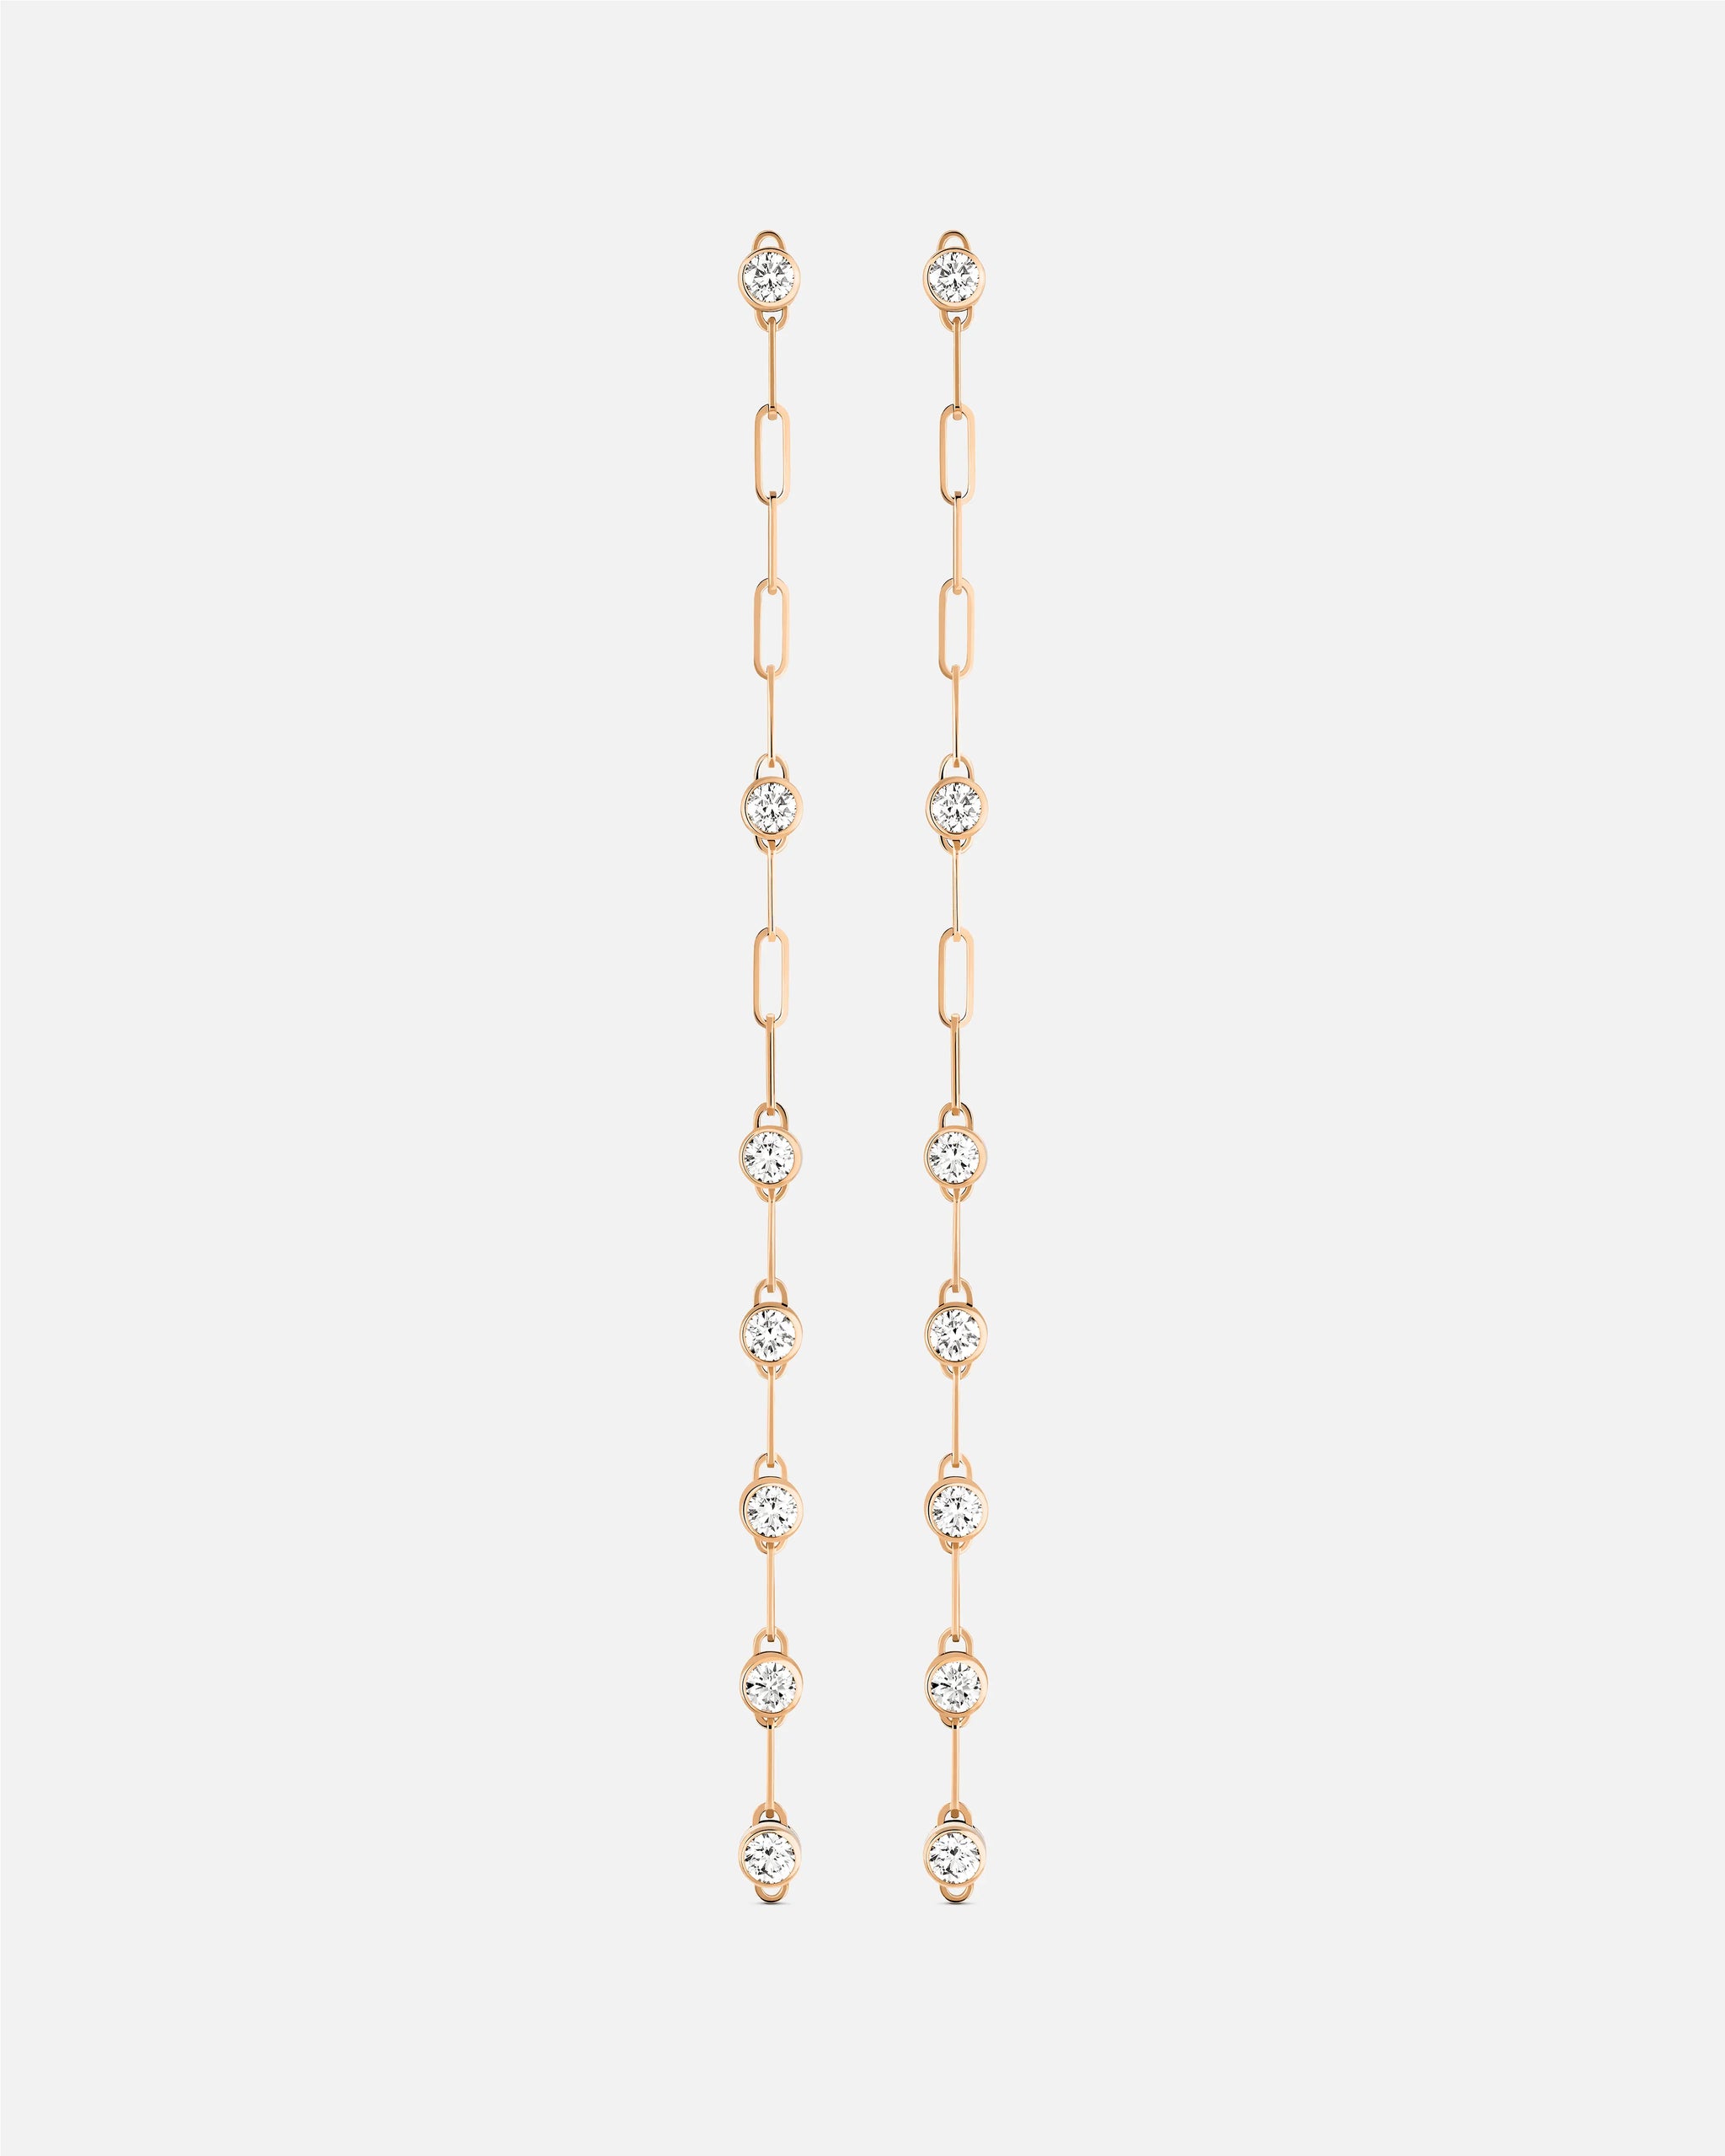 Evening GM Classics Earrings in Rose Gold - 1 - Nouvel Heritage